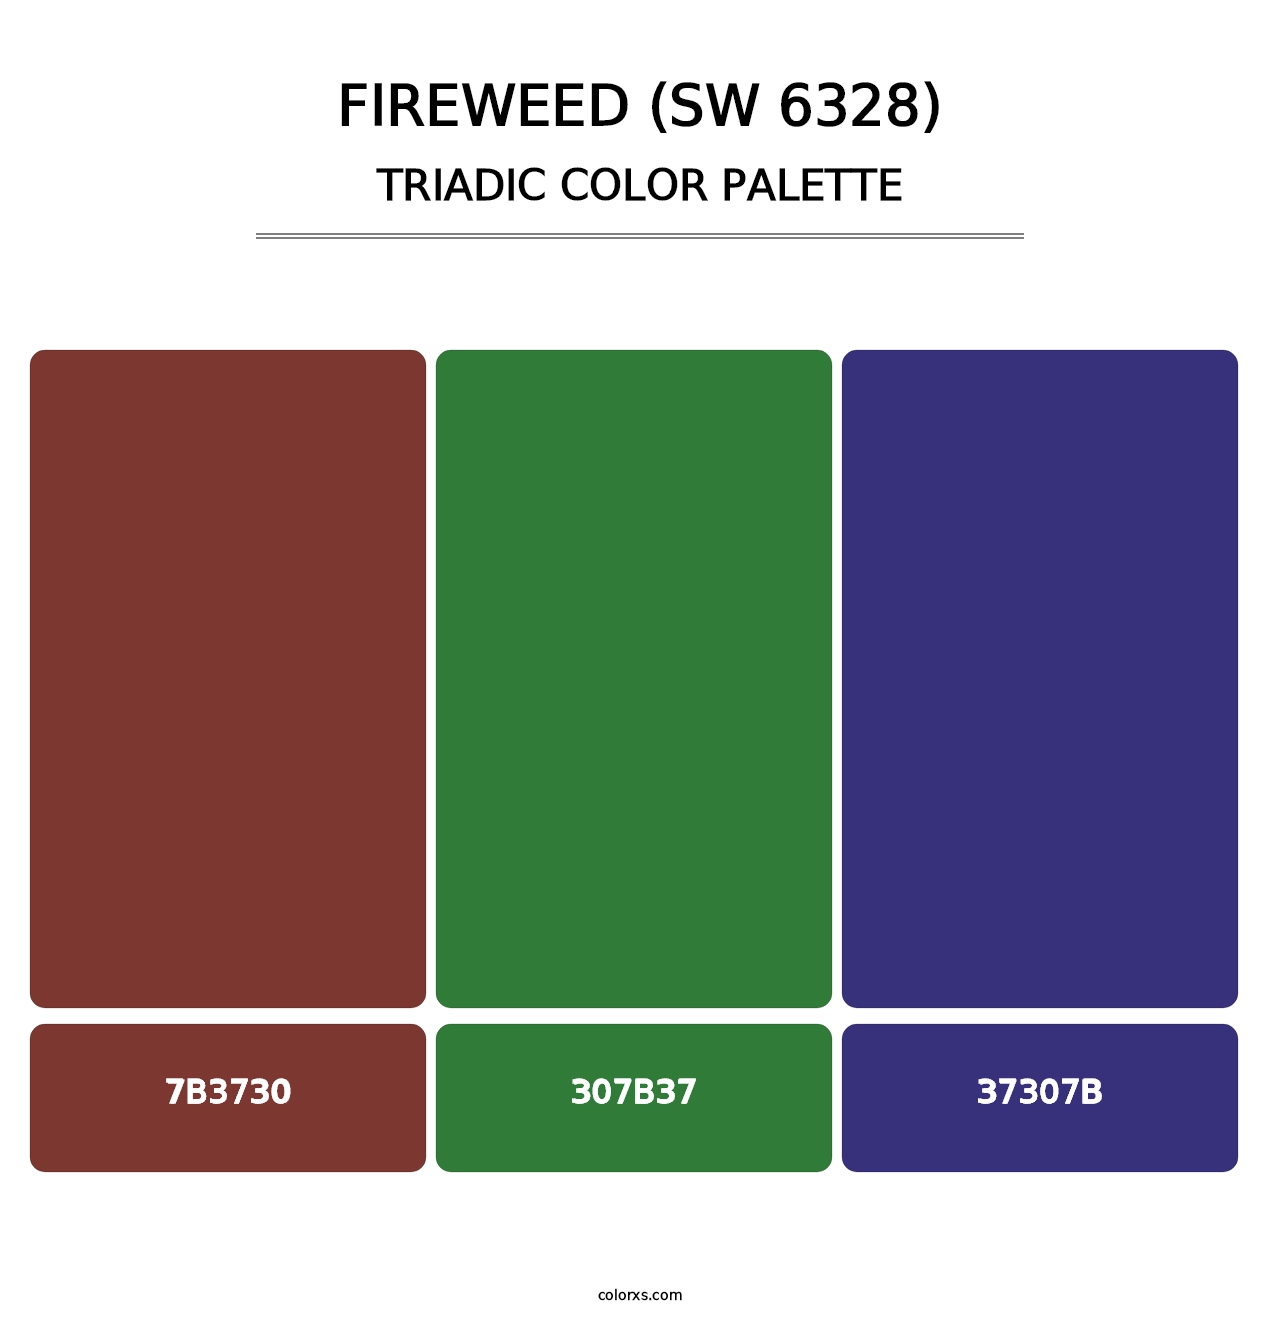 Fireweed (SW 6328) - Triadic Color Palette